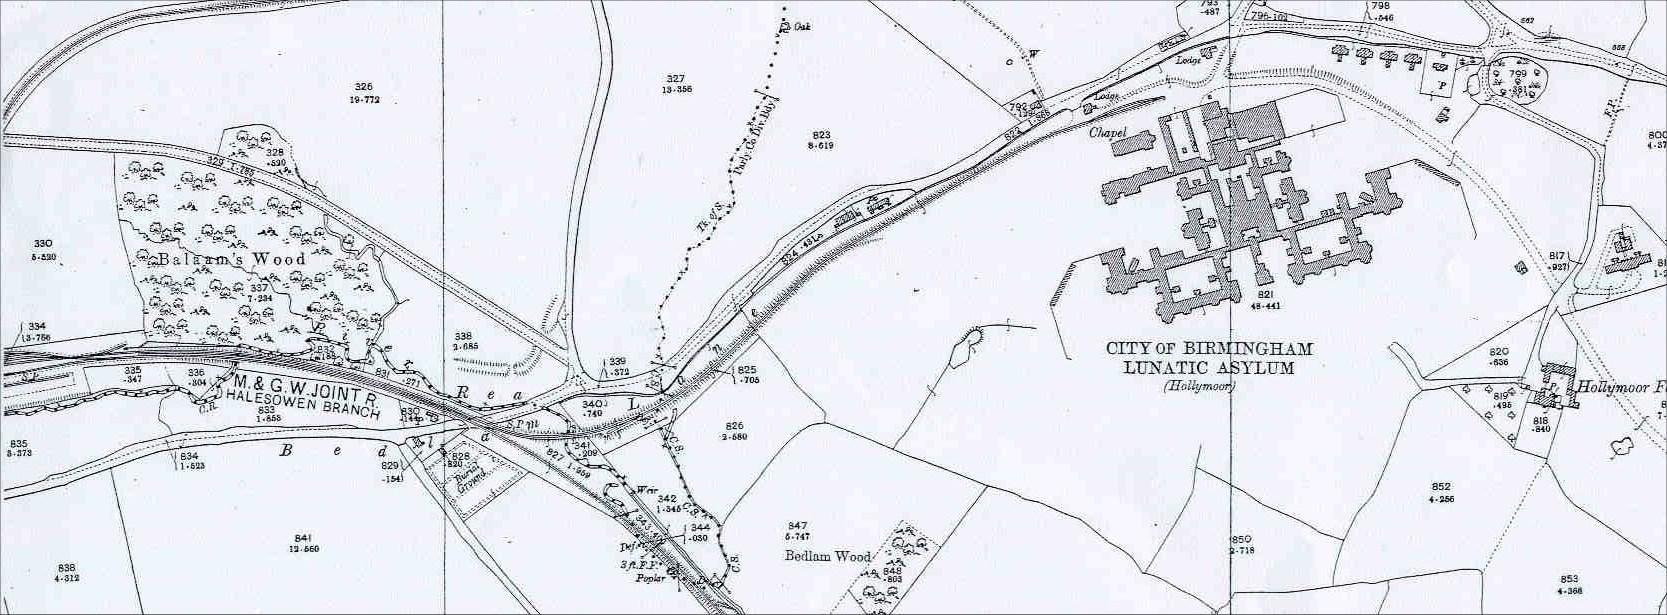 Old Ordnance Survey map (extract)